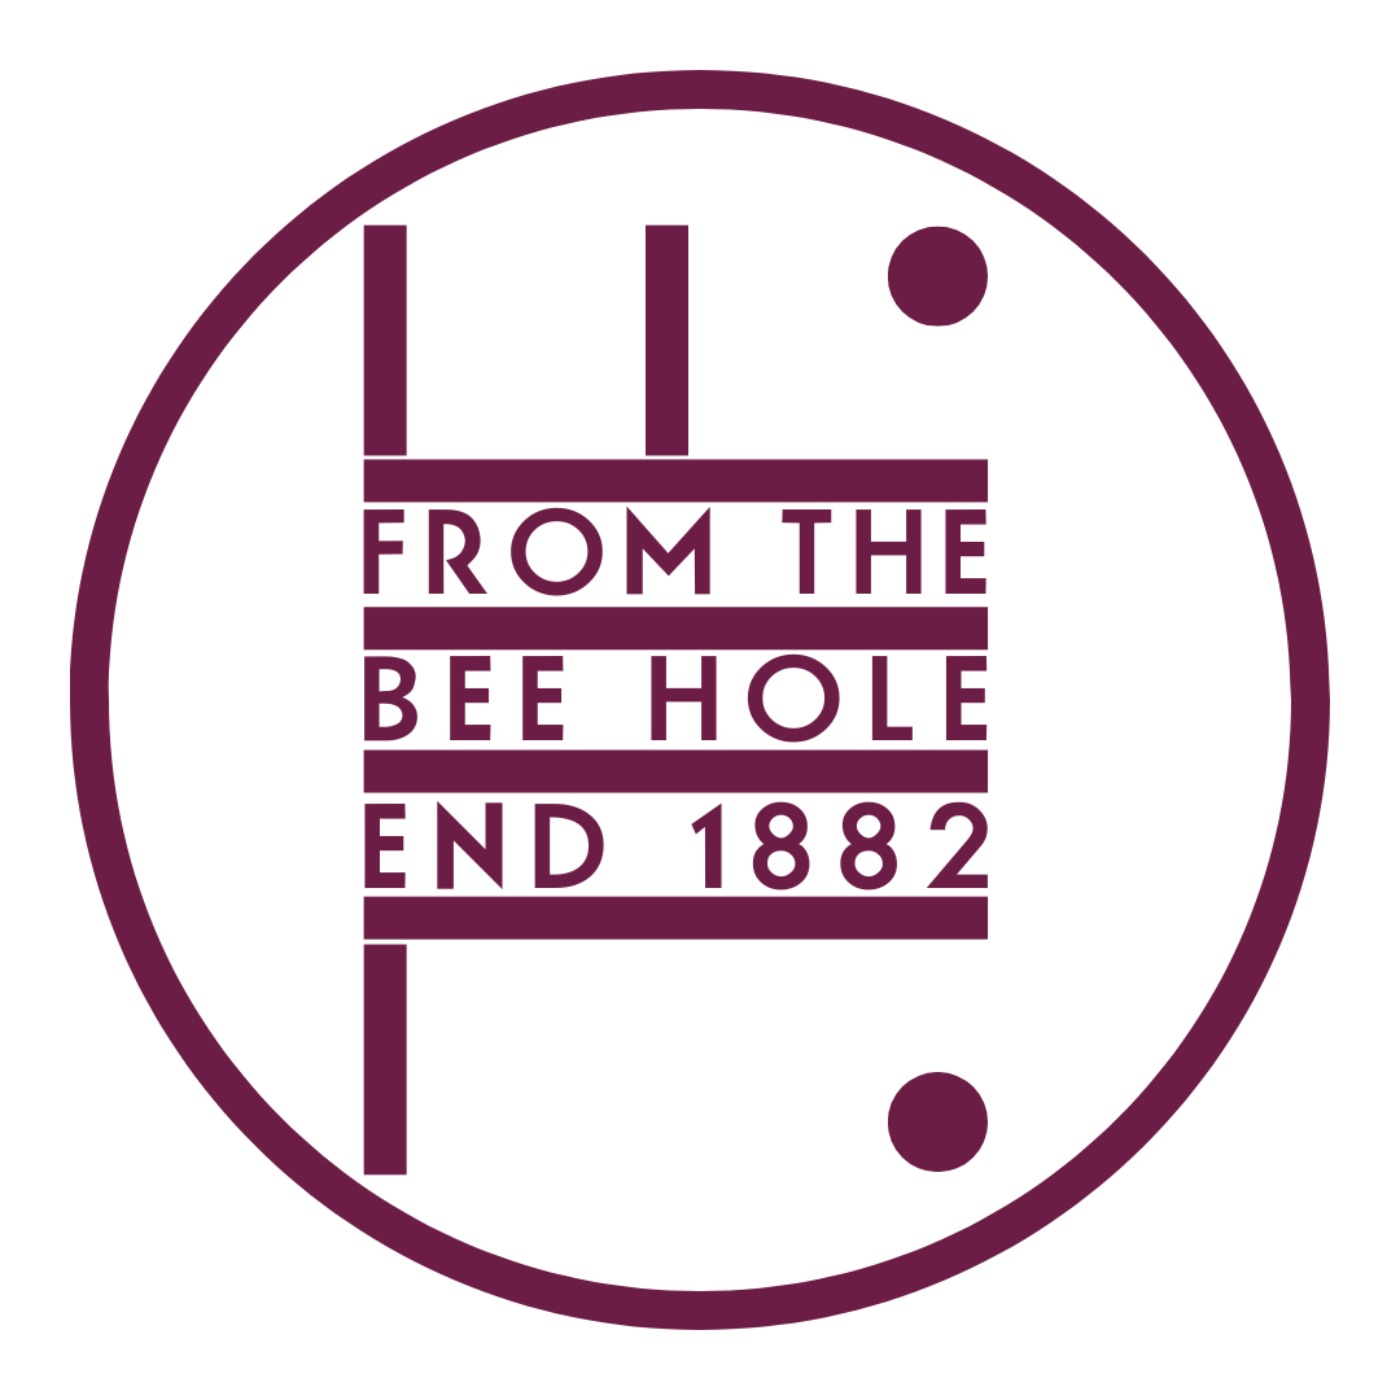 From the Bee Hole End - The Debrief - West Ham (AWAY)